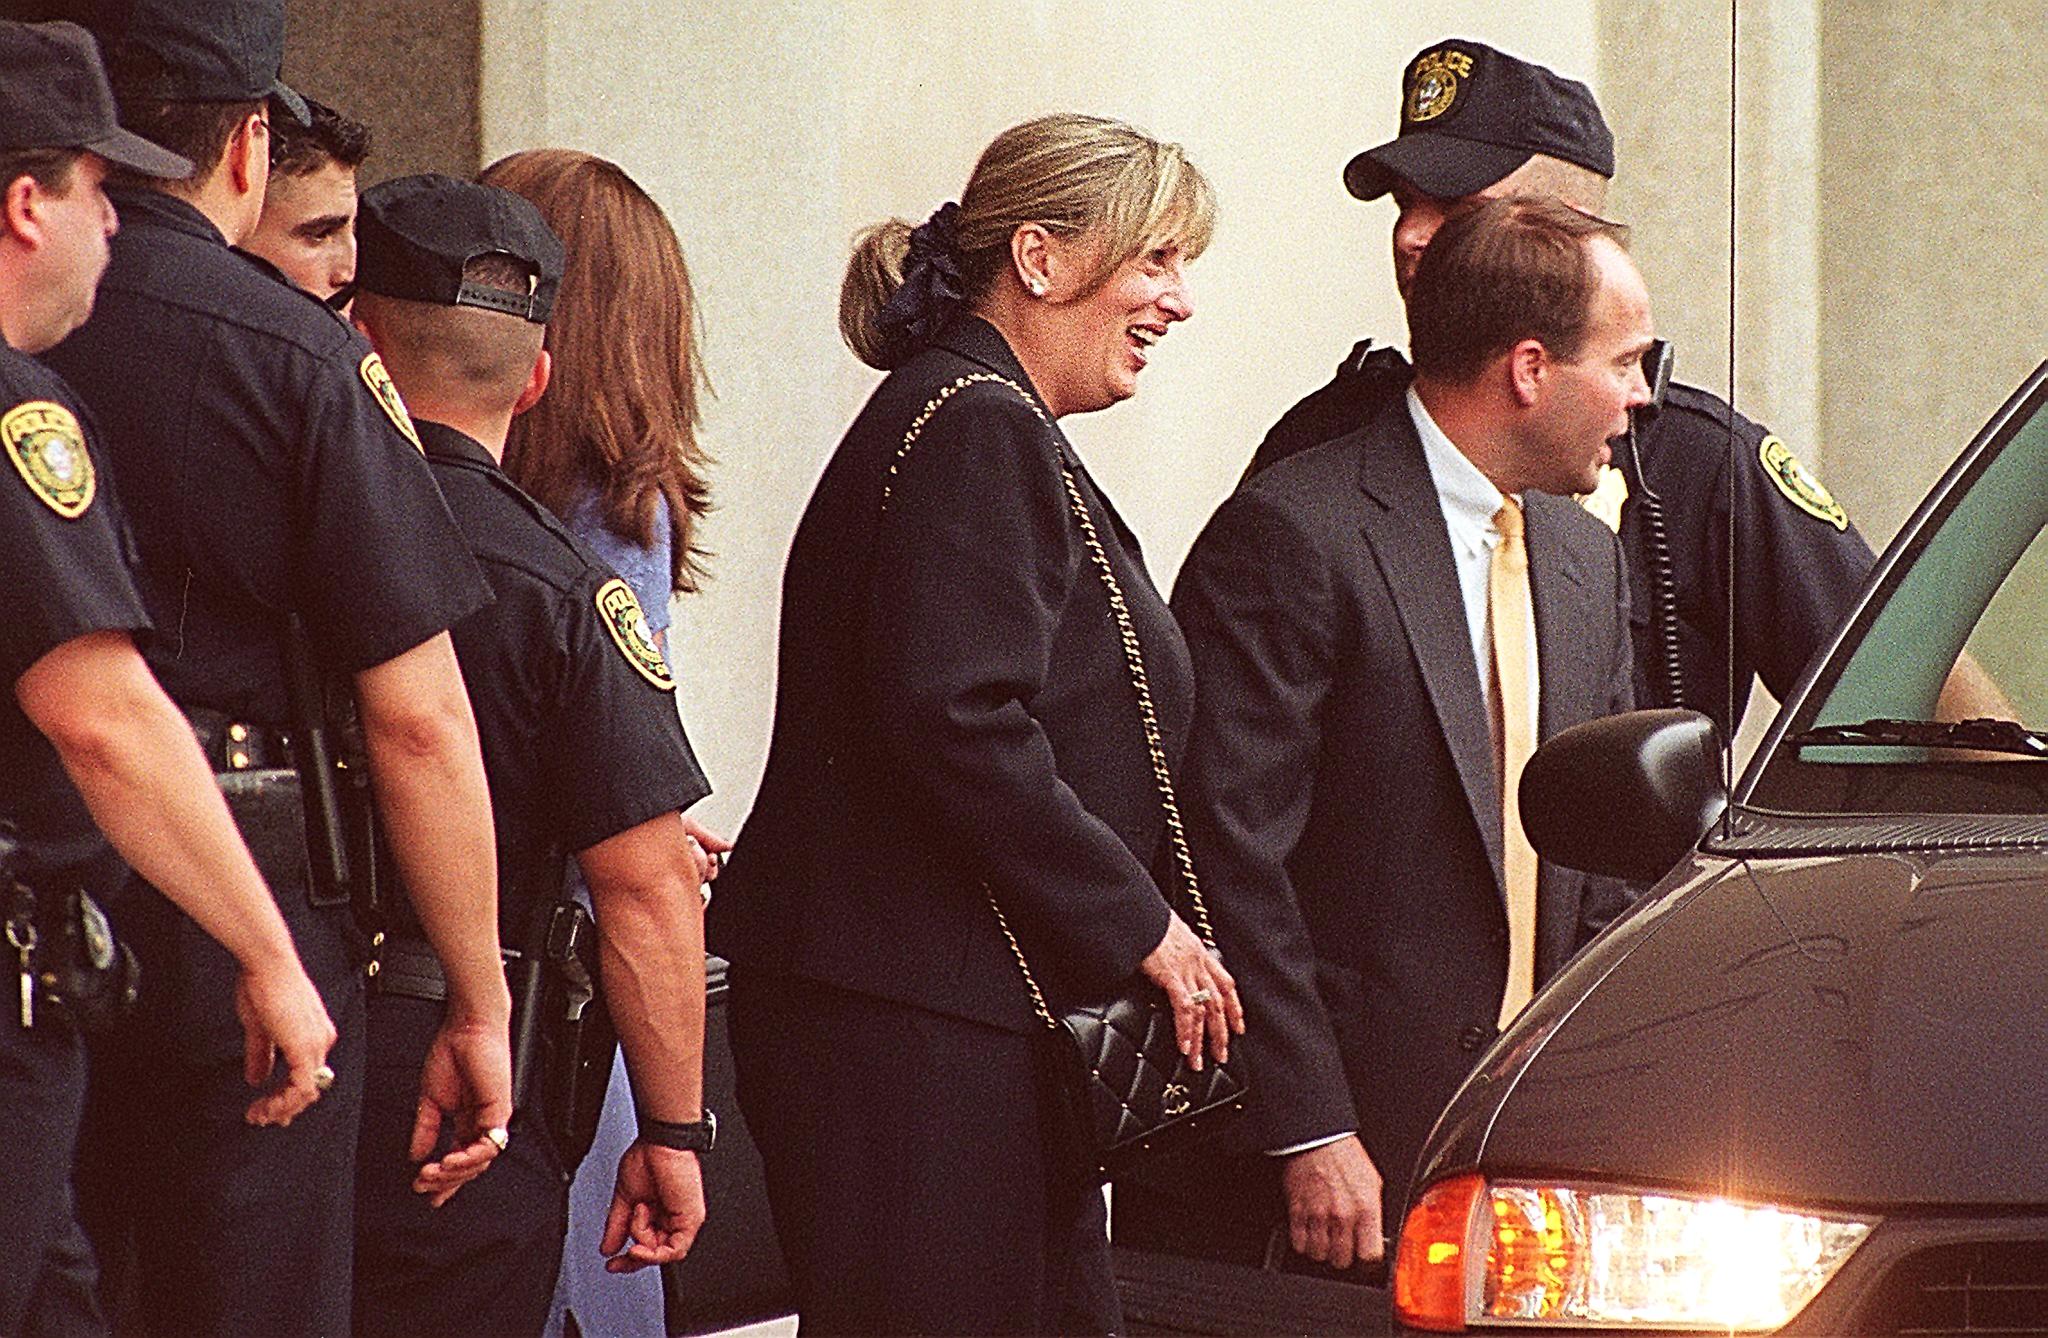 Linda Tripp leaves the US District Courthouse in Washington, DC on 30 June 1998